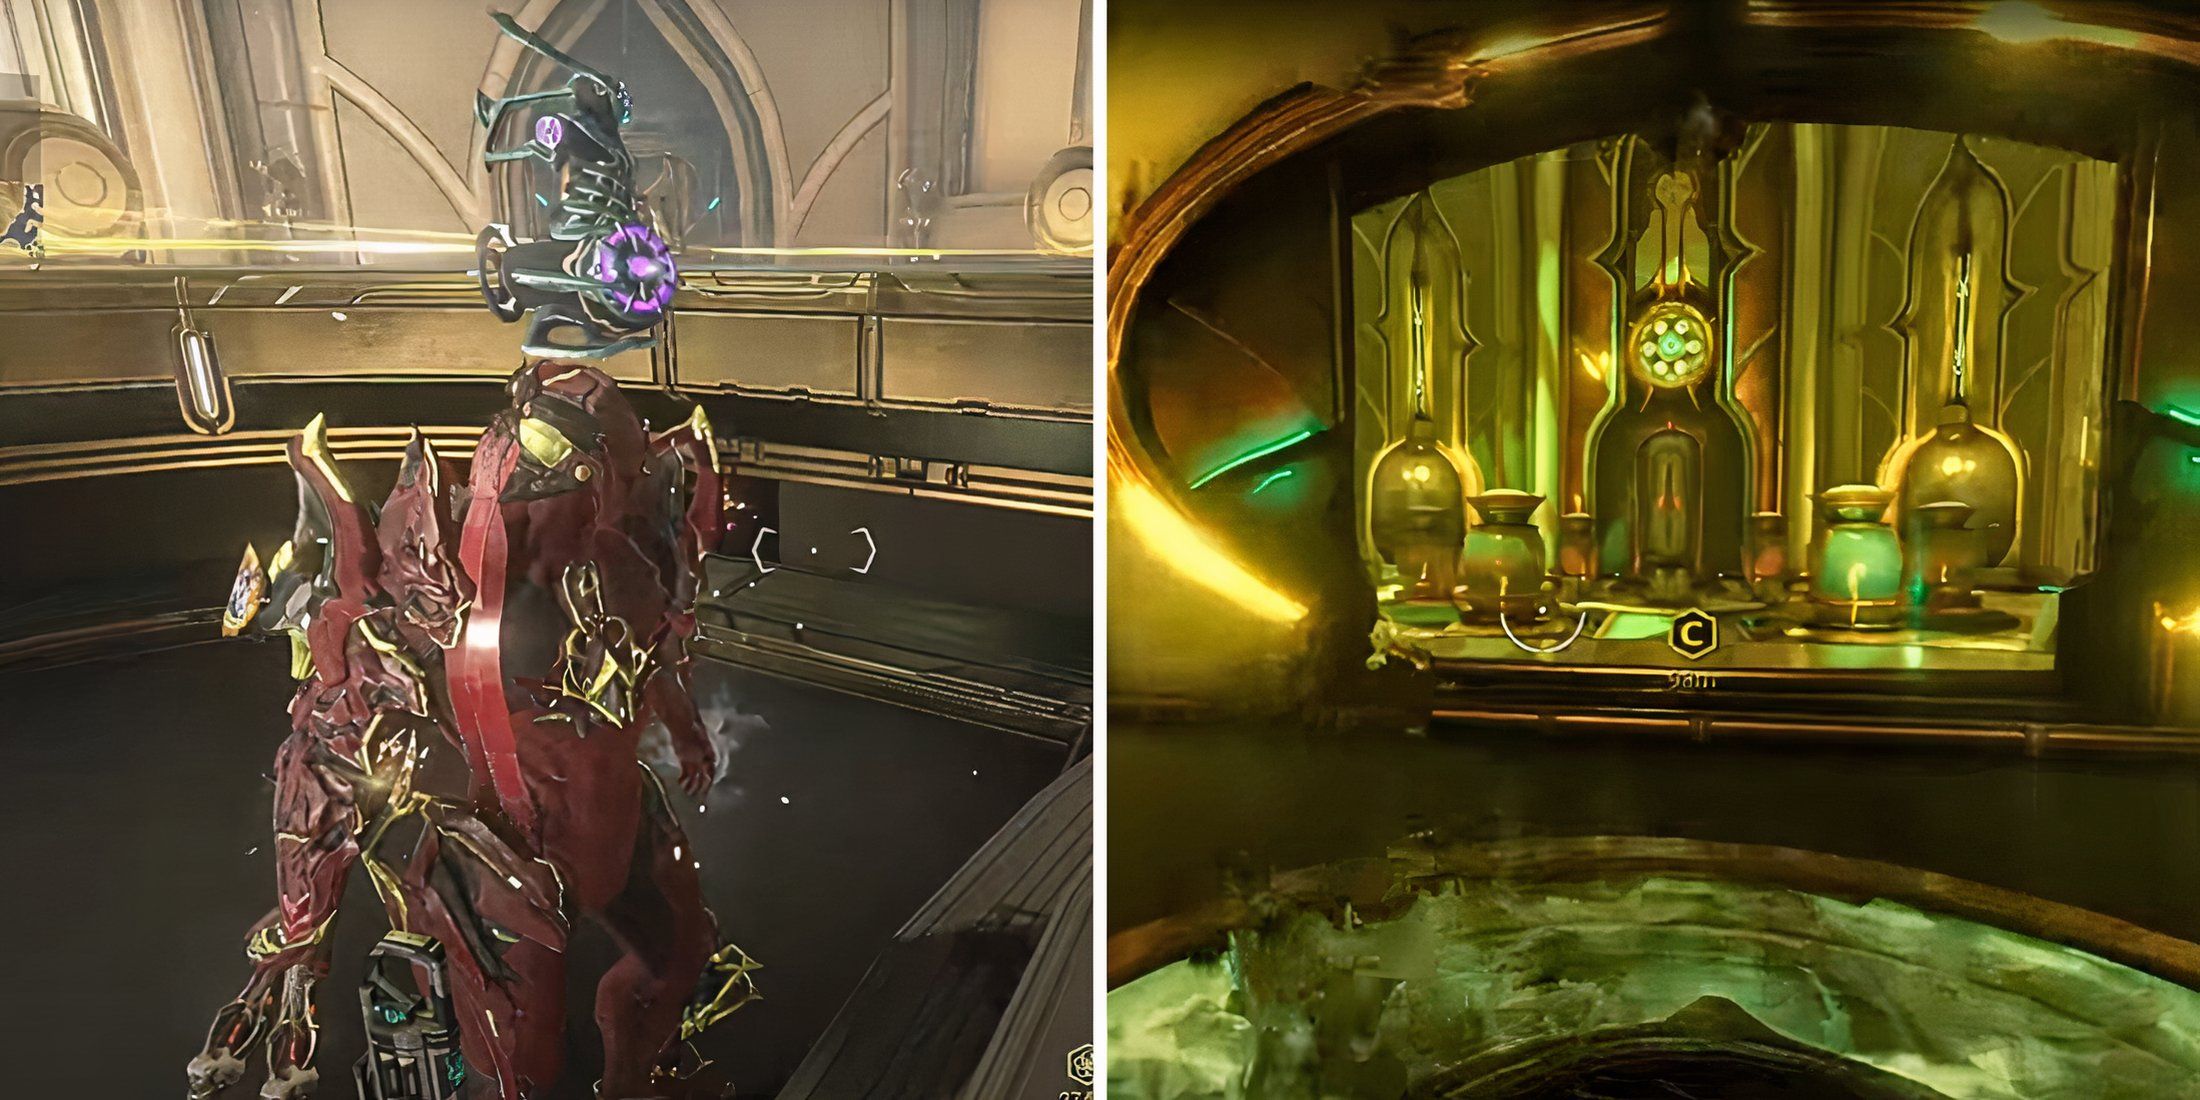 The Warframe character is fighting through the vaults to find the Blood Rush Mod.